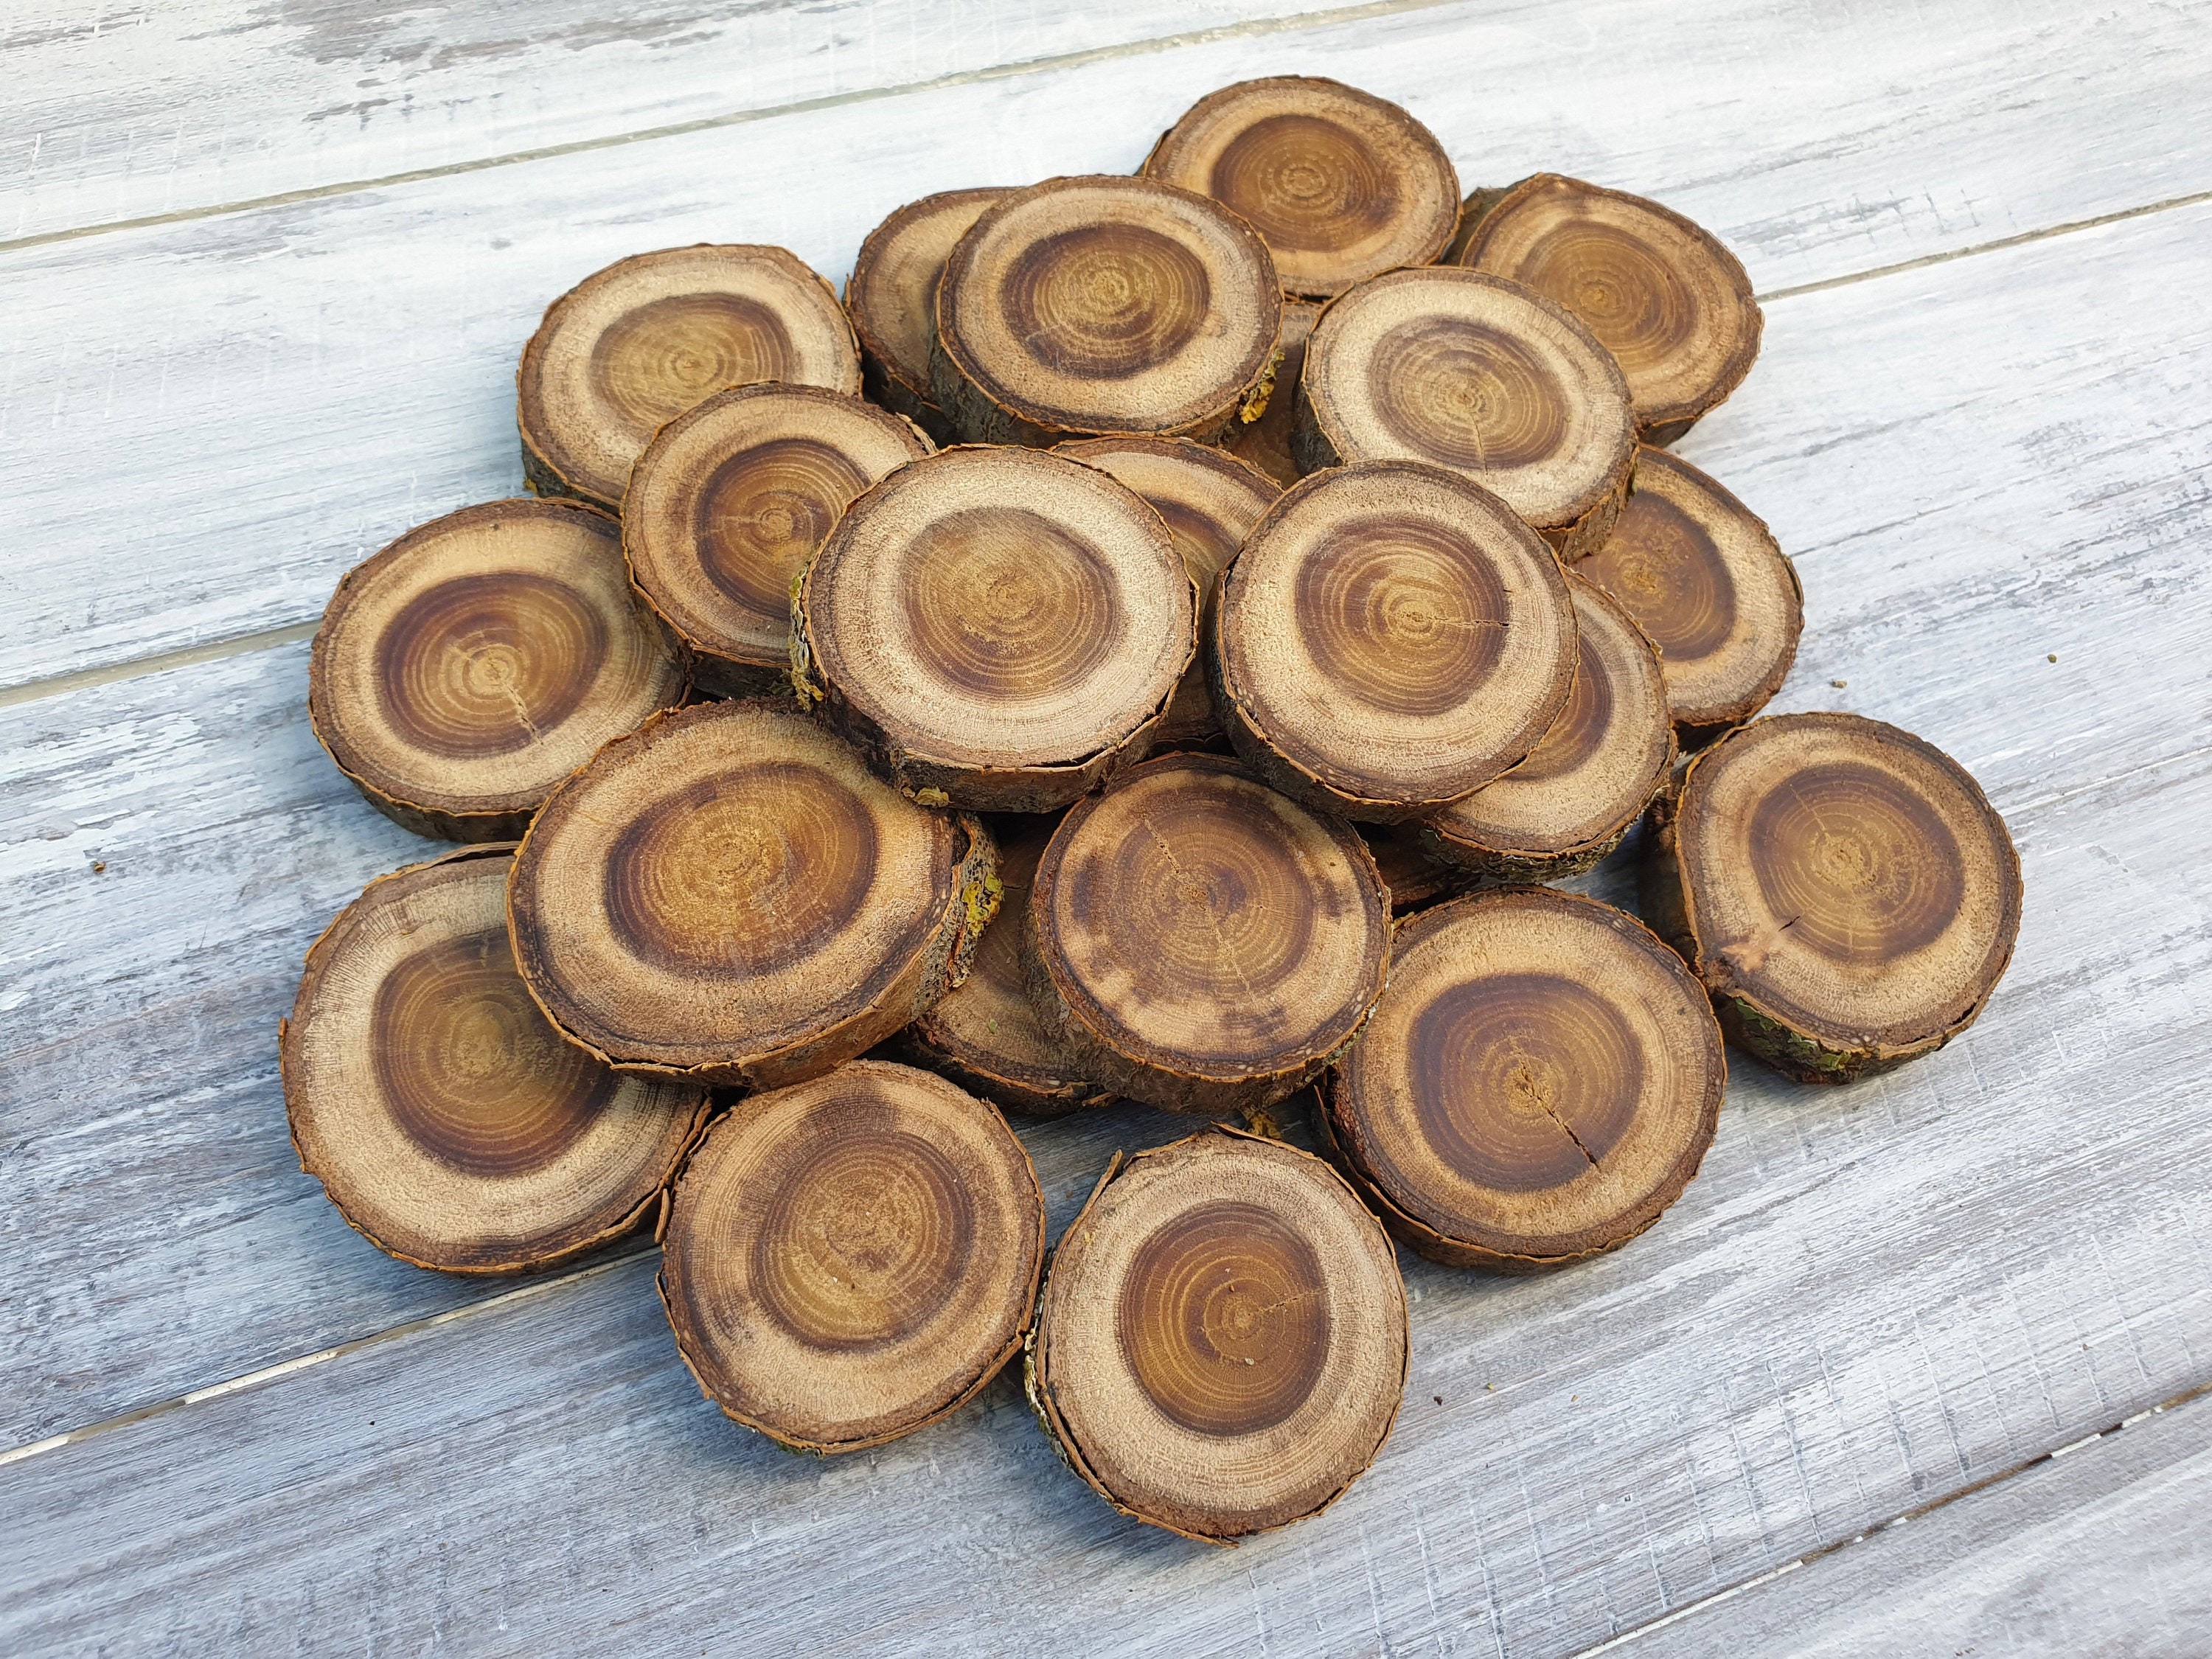 3 Pcs 10-12 Inch Wood Slices for Centerpieces, Wood Rounds for Wedding  Centerpiece, DIY Projects, Painting, Etc 